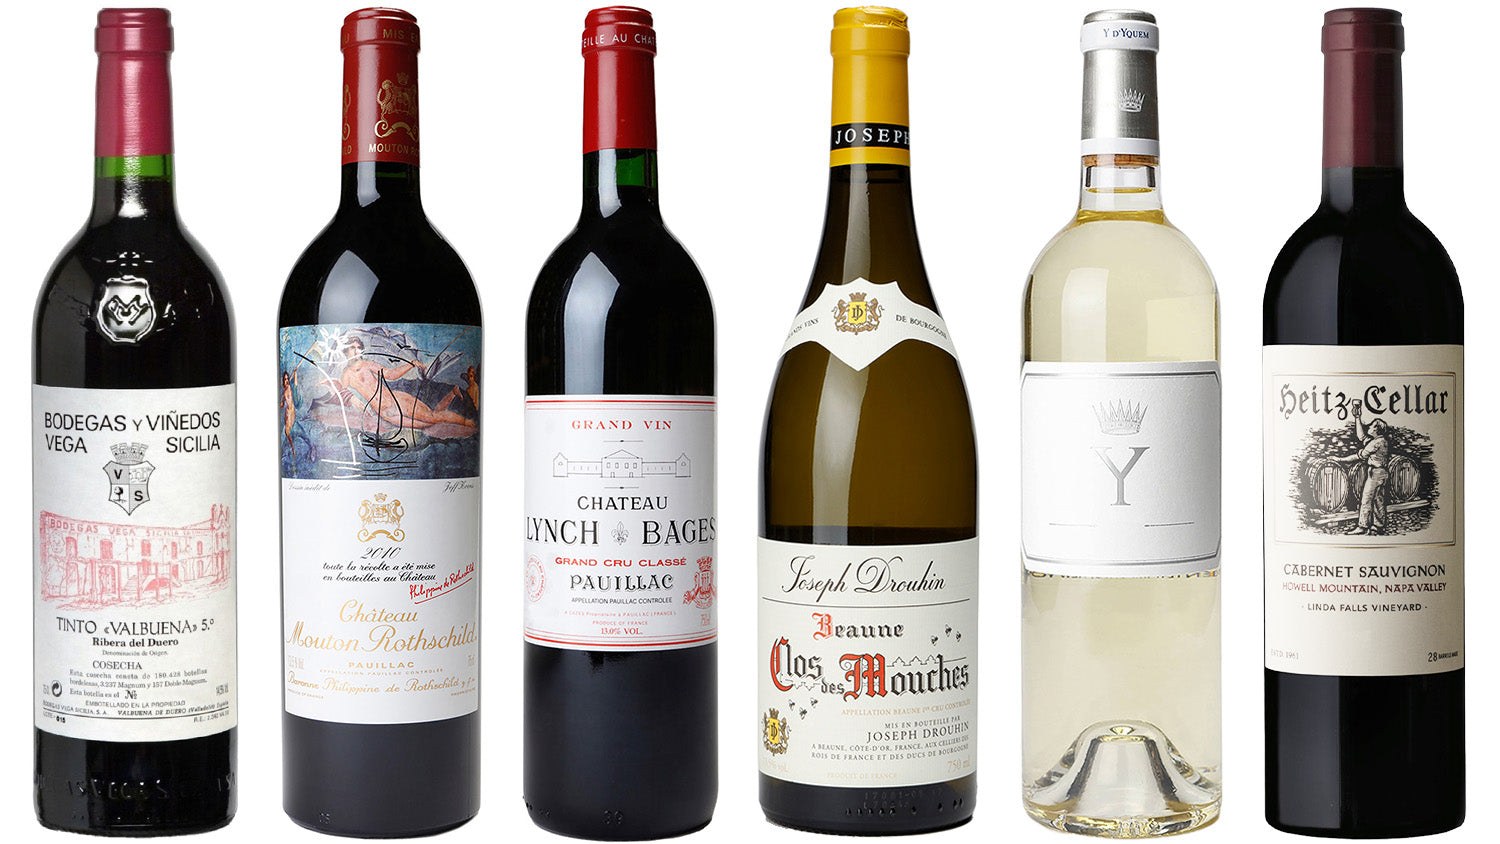 Built to Last: Wines to Welcome into Your Cellar